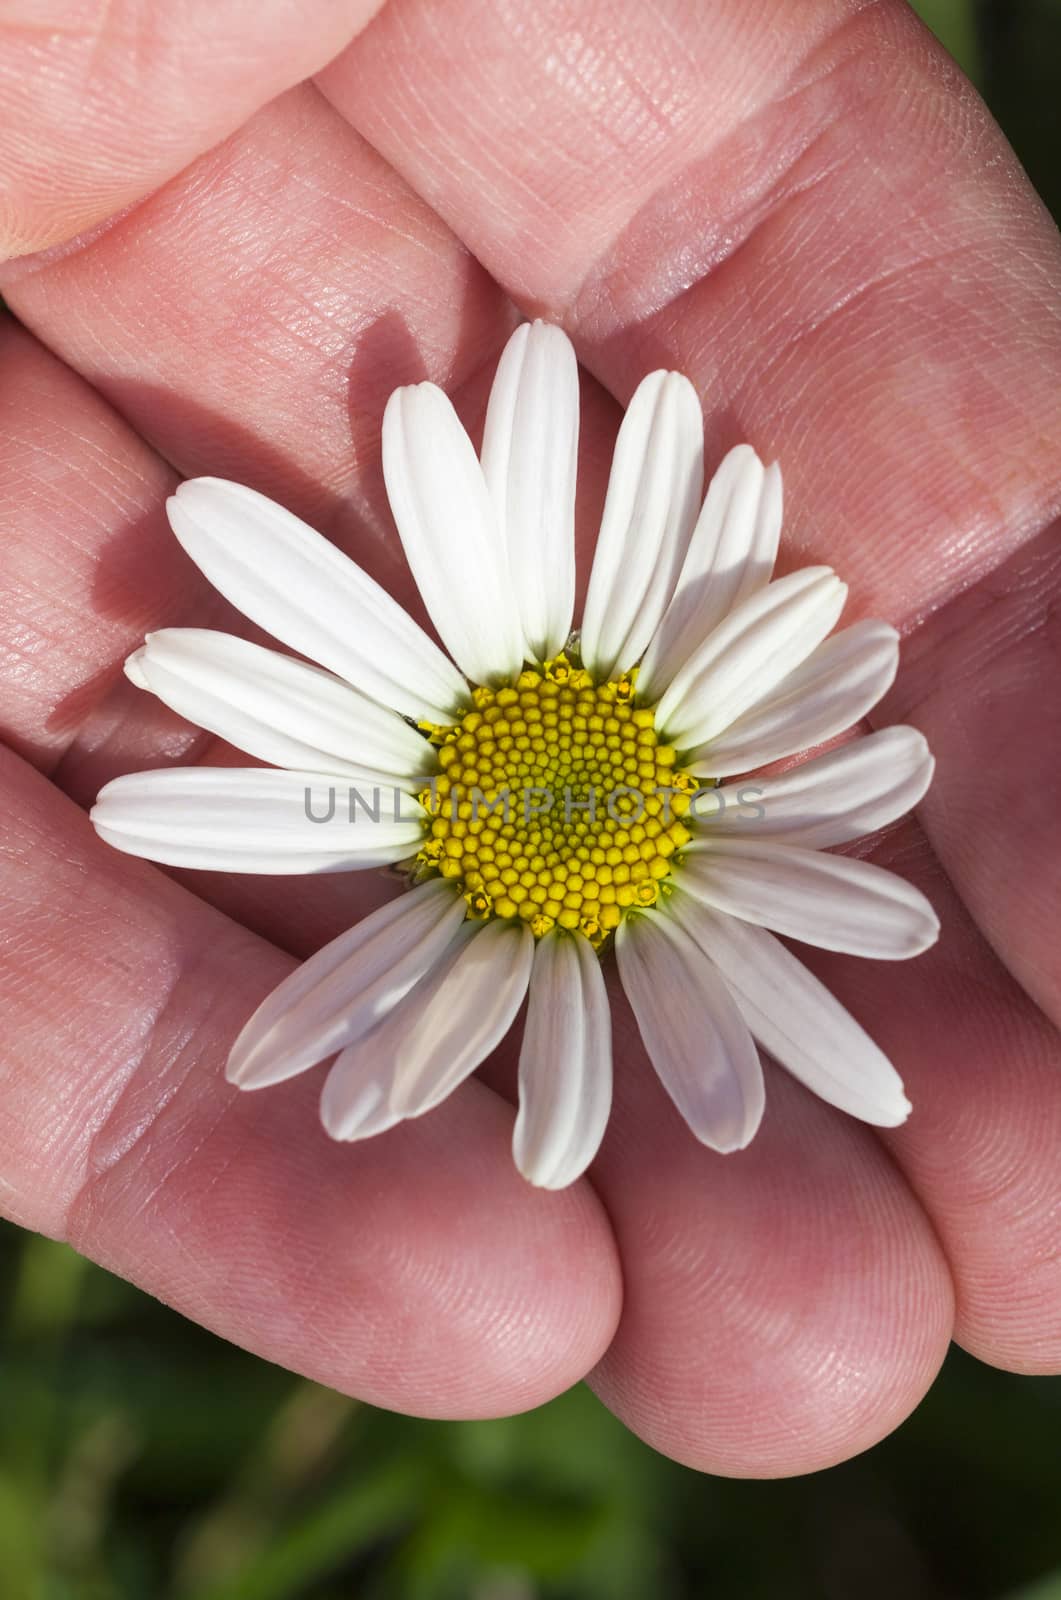 photographed close-up camomile , daisy flower with white petals